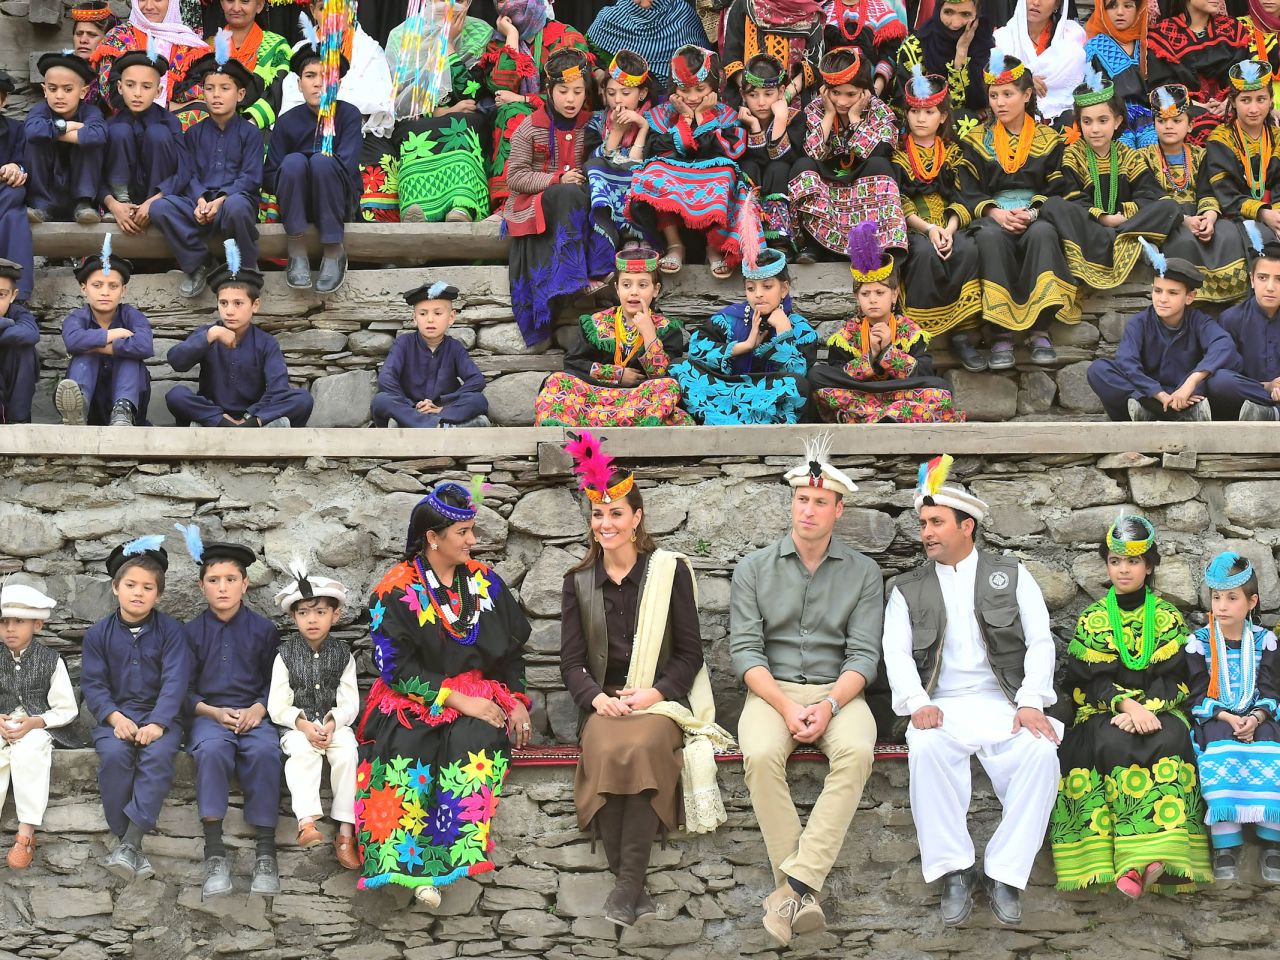 William and Catherine visit a settlement of the Kalash people in Chitral, Pakistan, in October 2019.